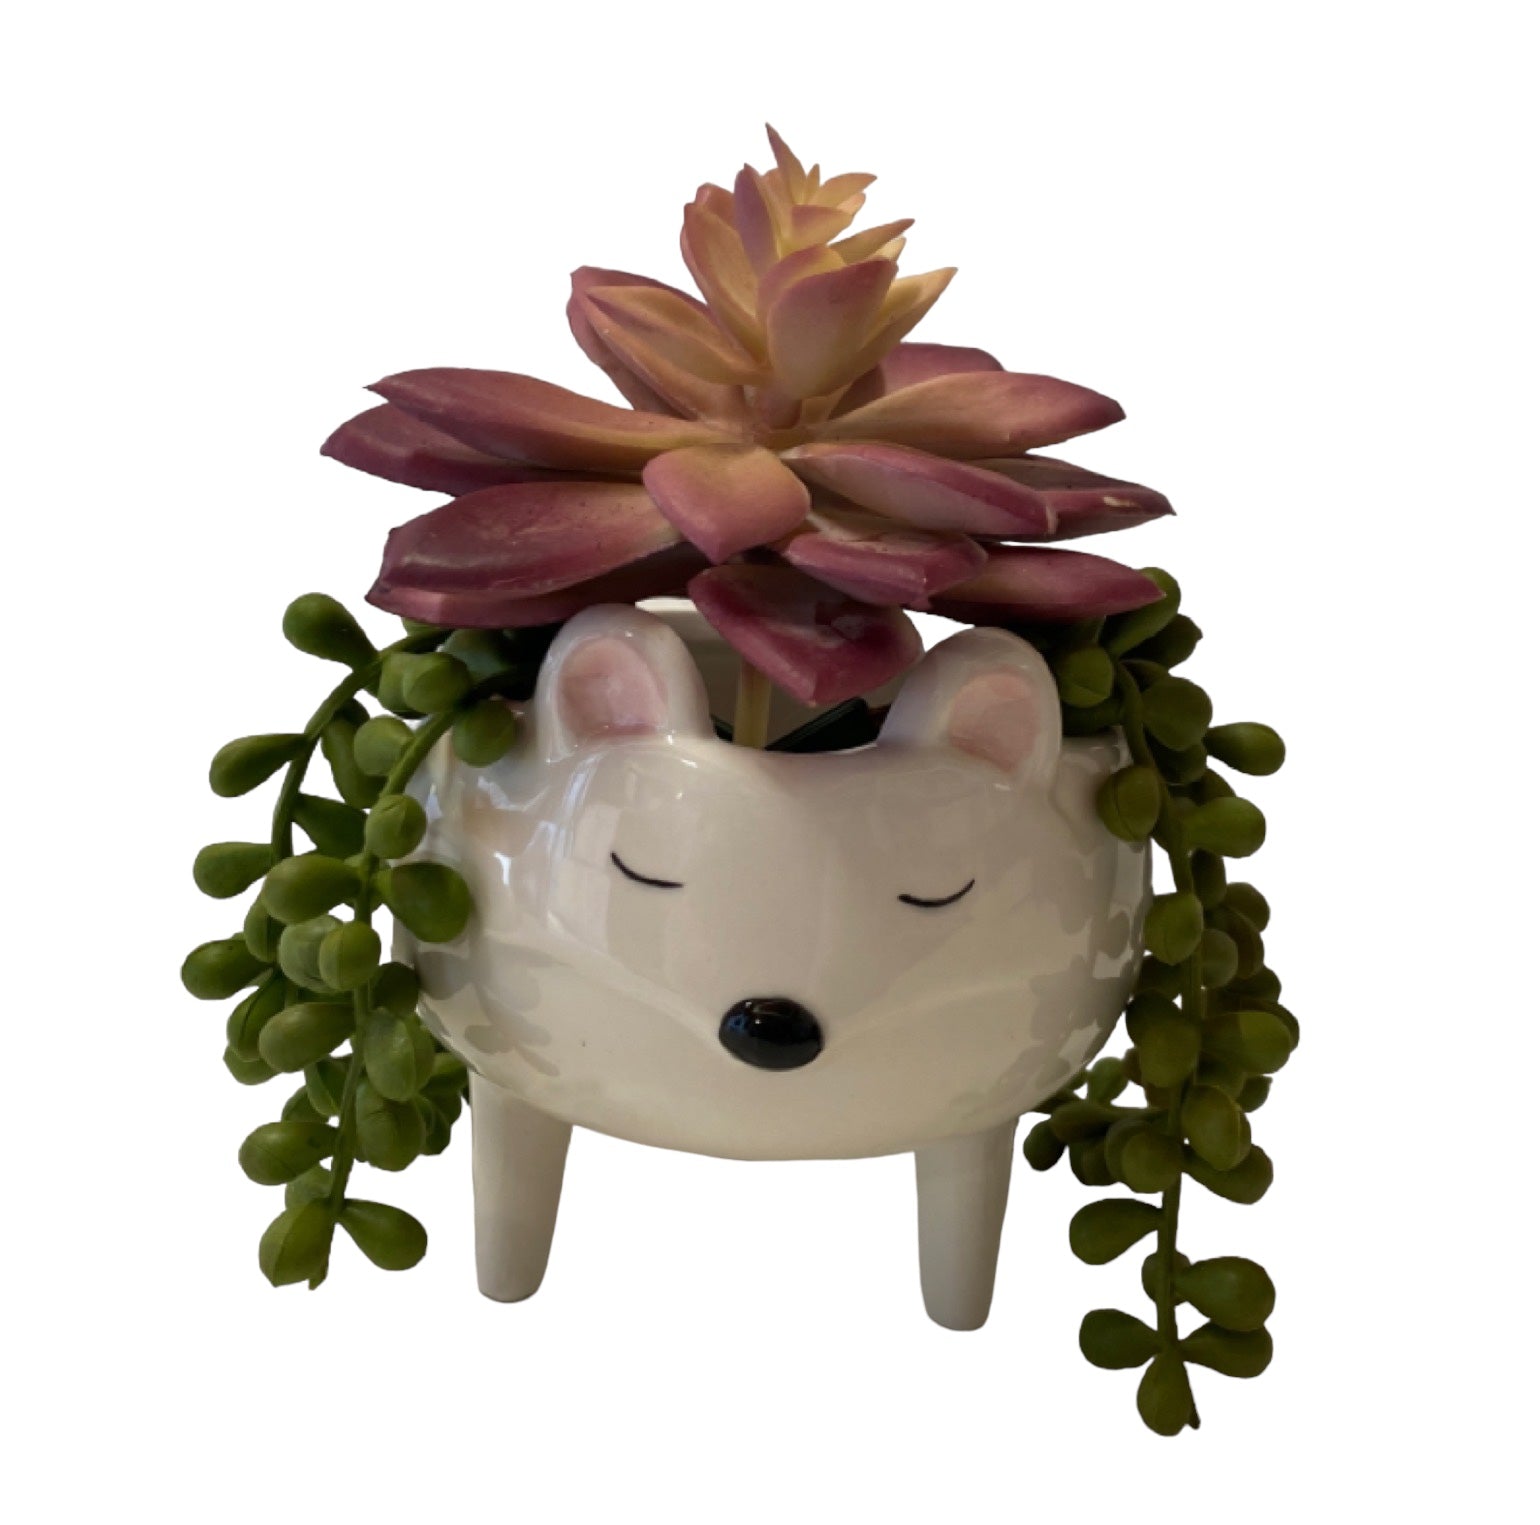 Mouse Pot Plant Planter Garden - The Renmy Store Homewares & Gifts 